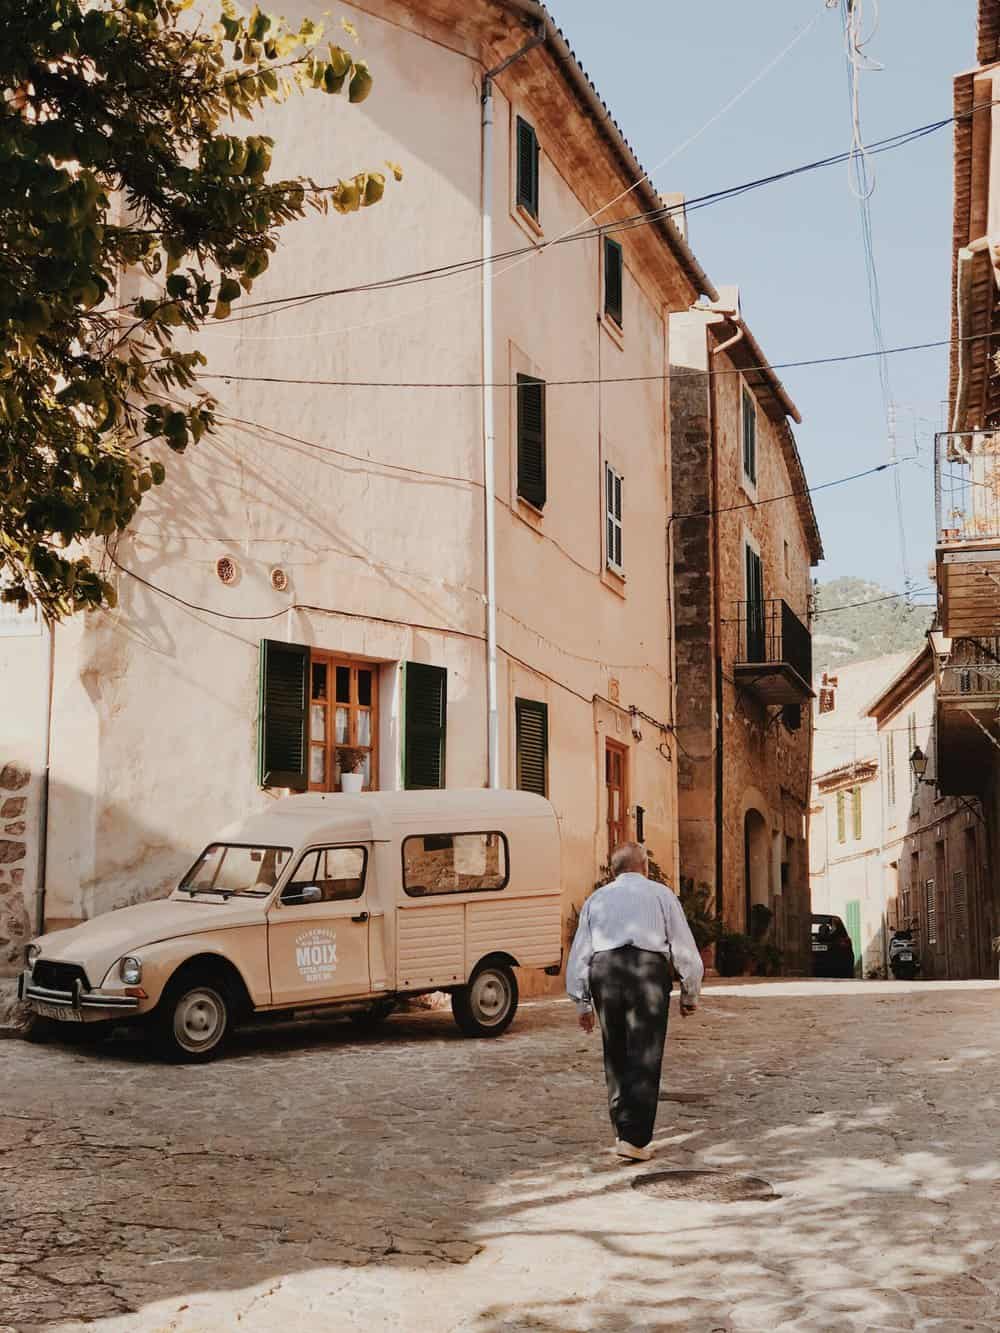 An older man roams the quiet streets of spain.Living a slow pace of life. 